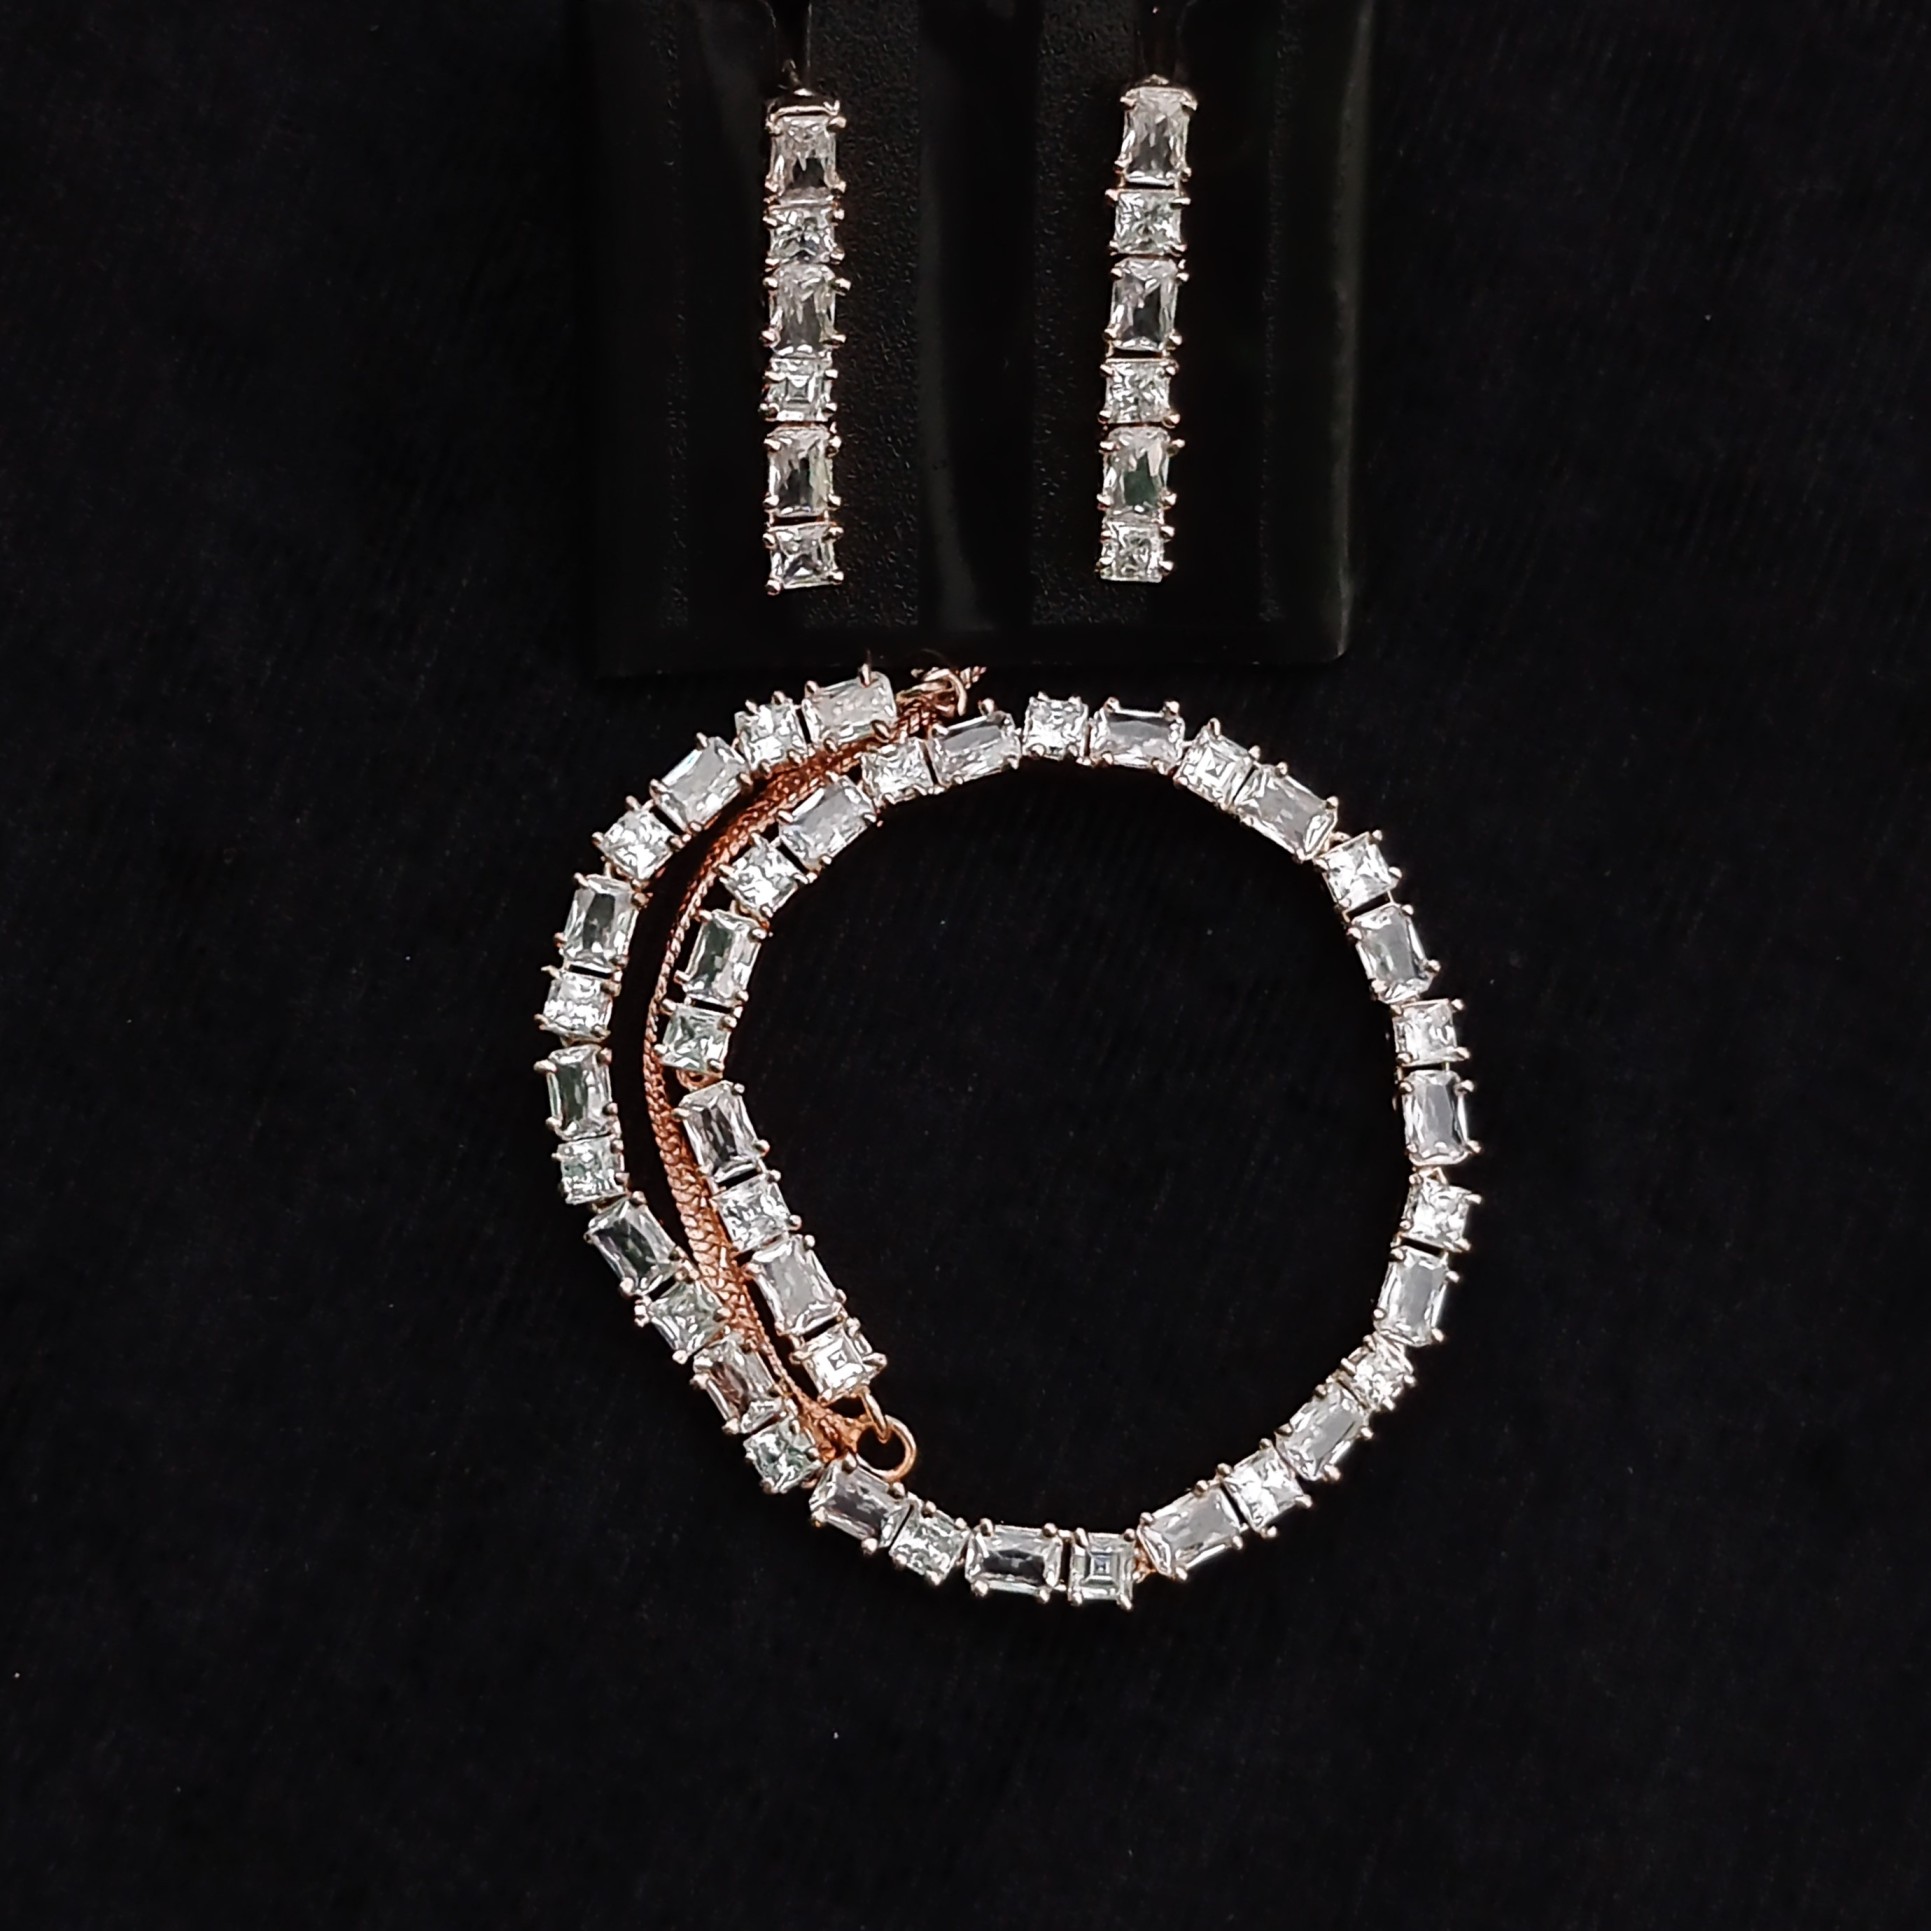 White Gold And Diamond Convertible Bracelet And Necklace Set Available For  Immediate Sale At Sotheby's